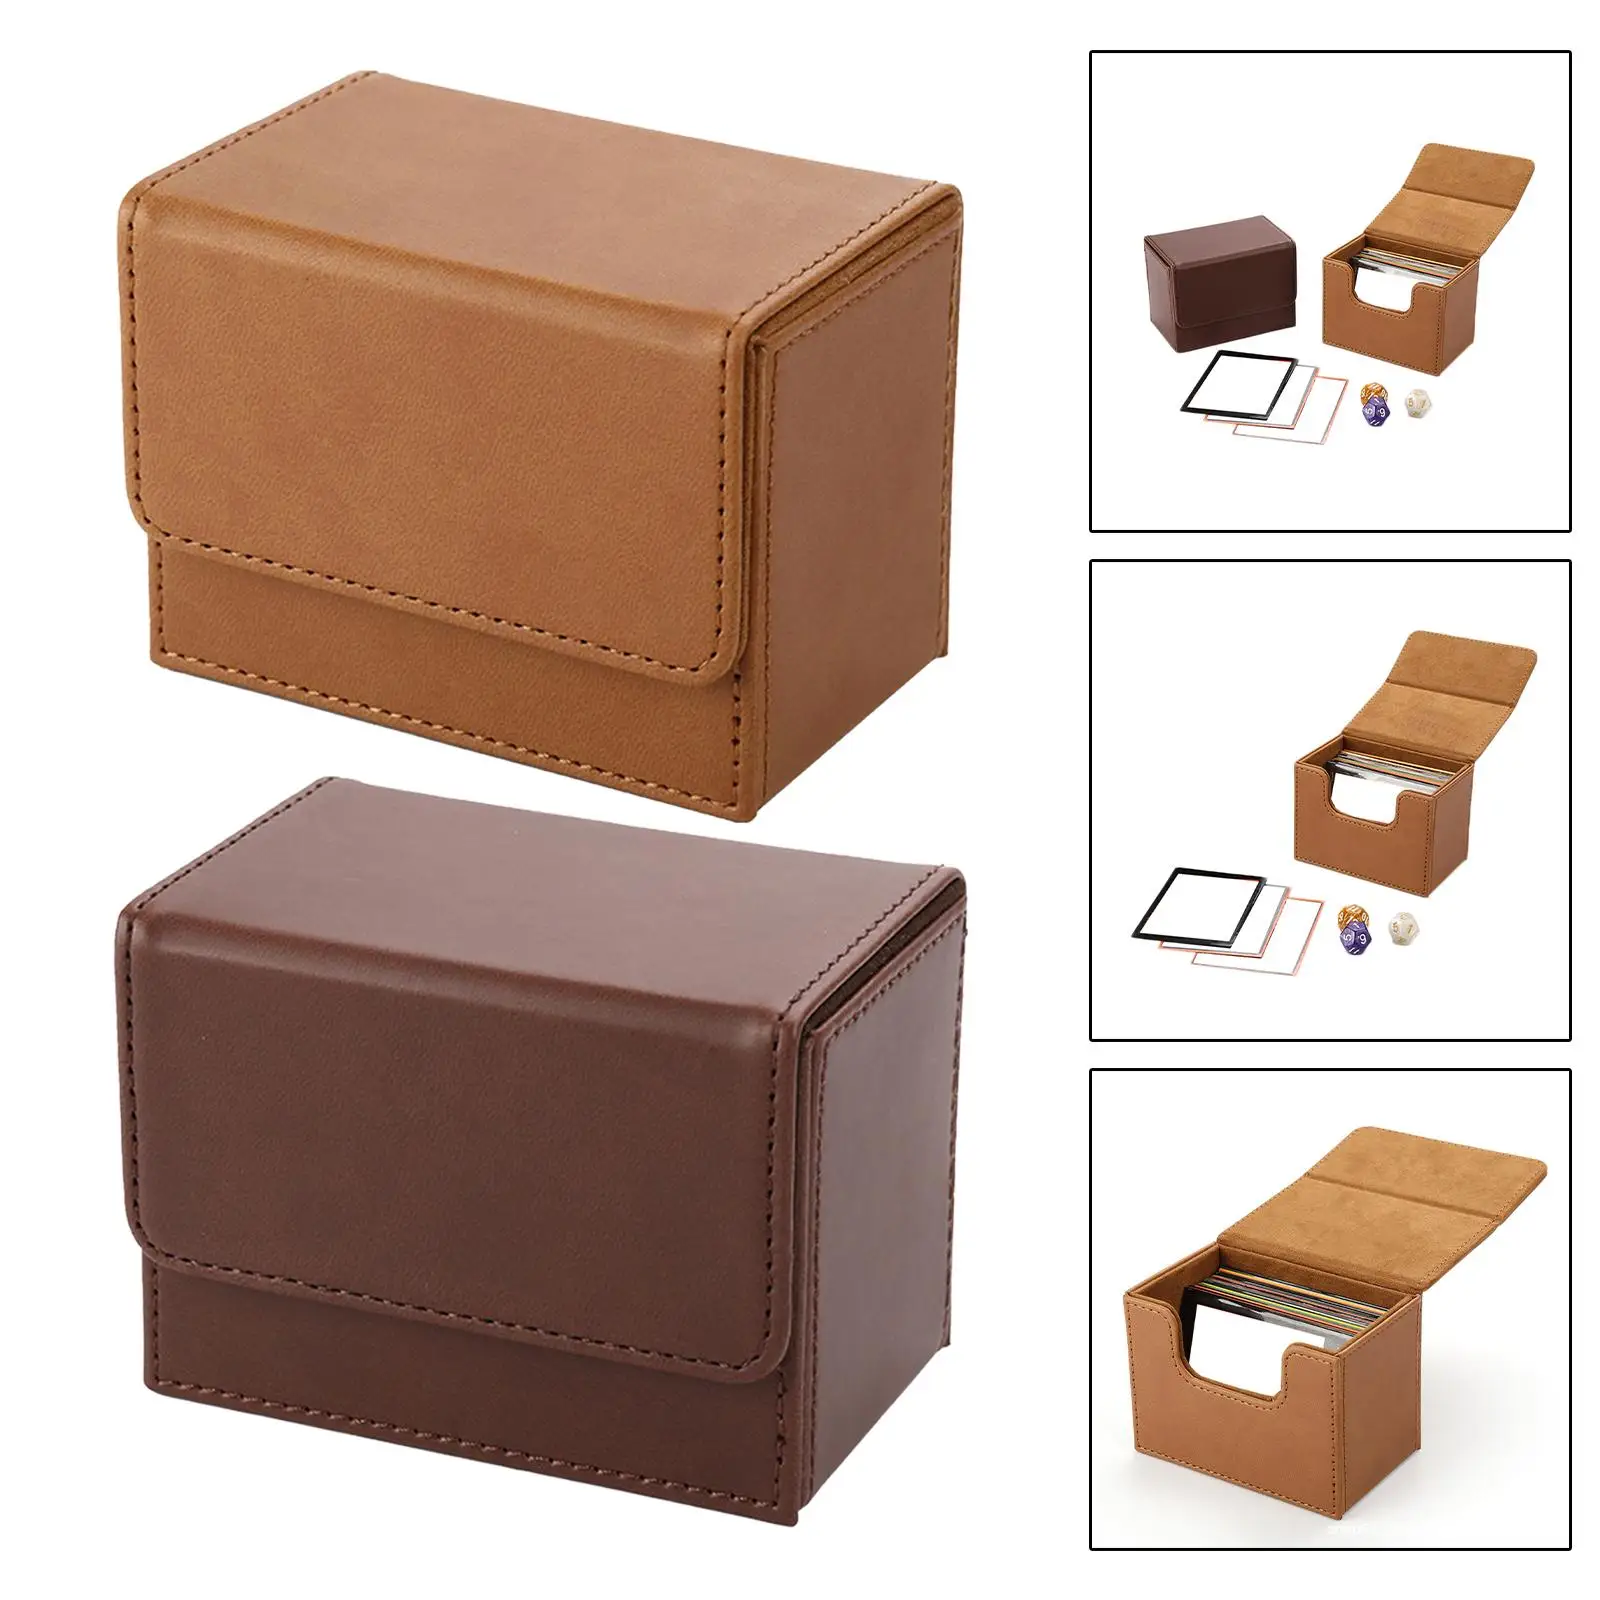 Card Game Deck Storage Box PU leather Card Gaming Accessories Organizer Trading Card Deck Box for Sport Card